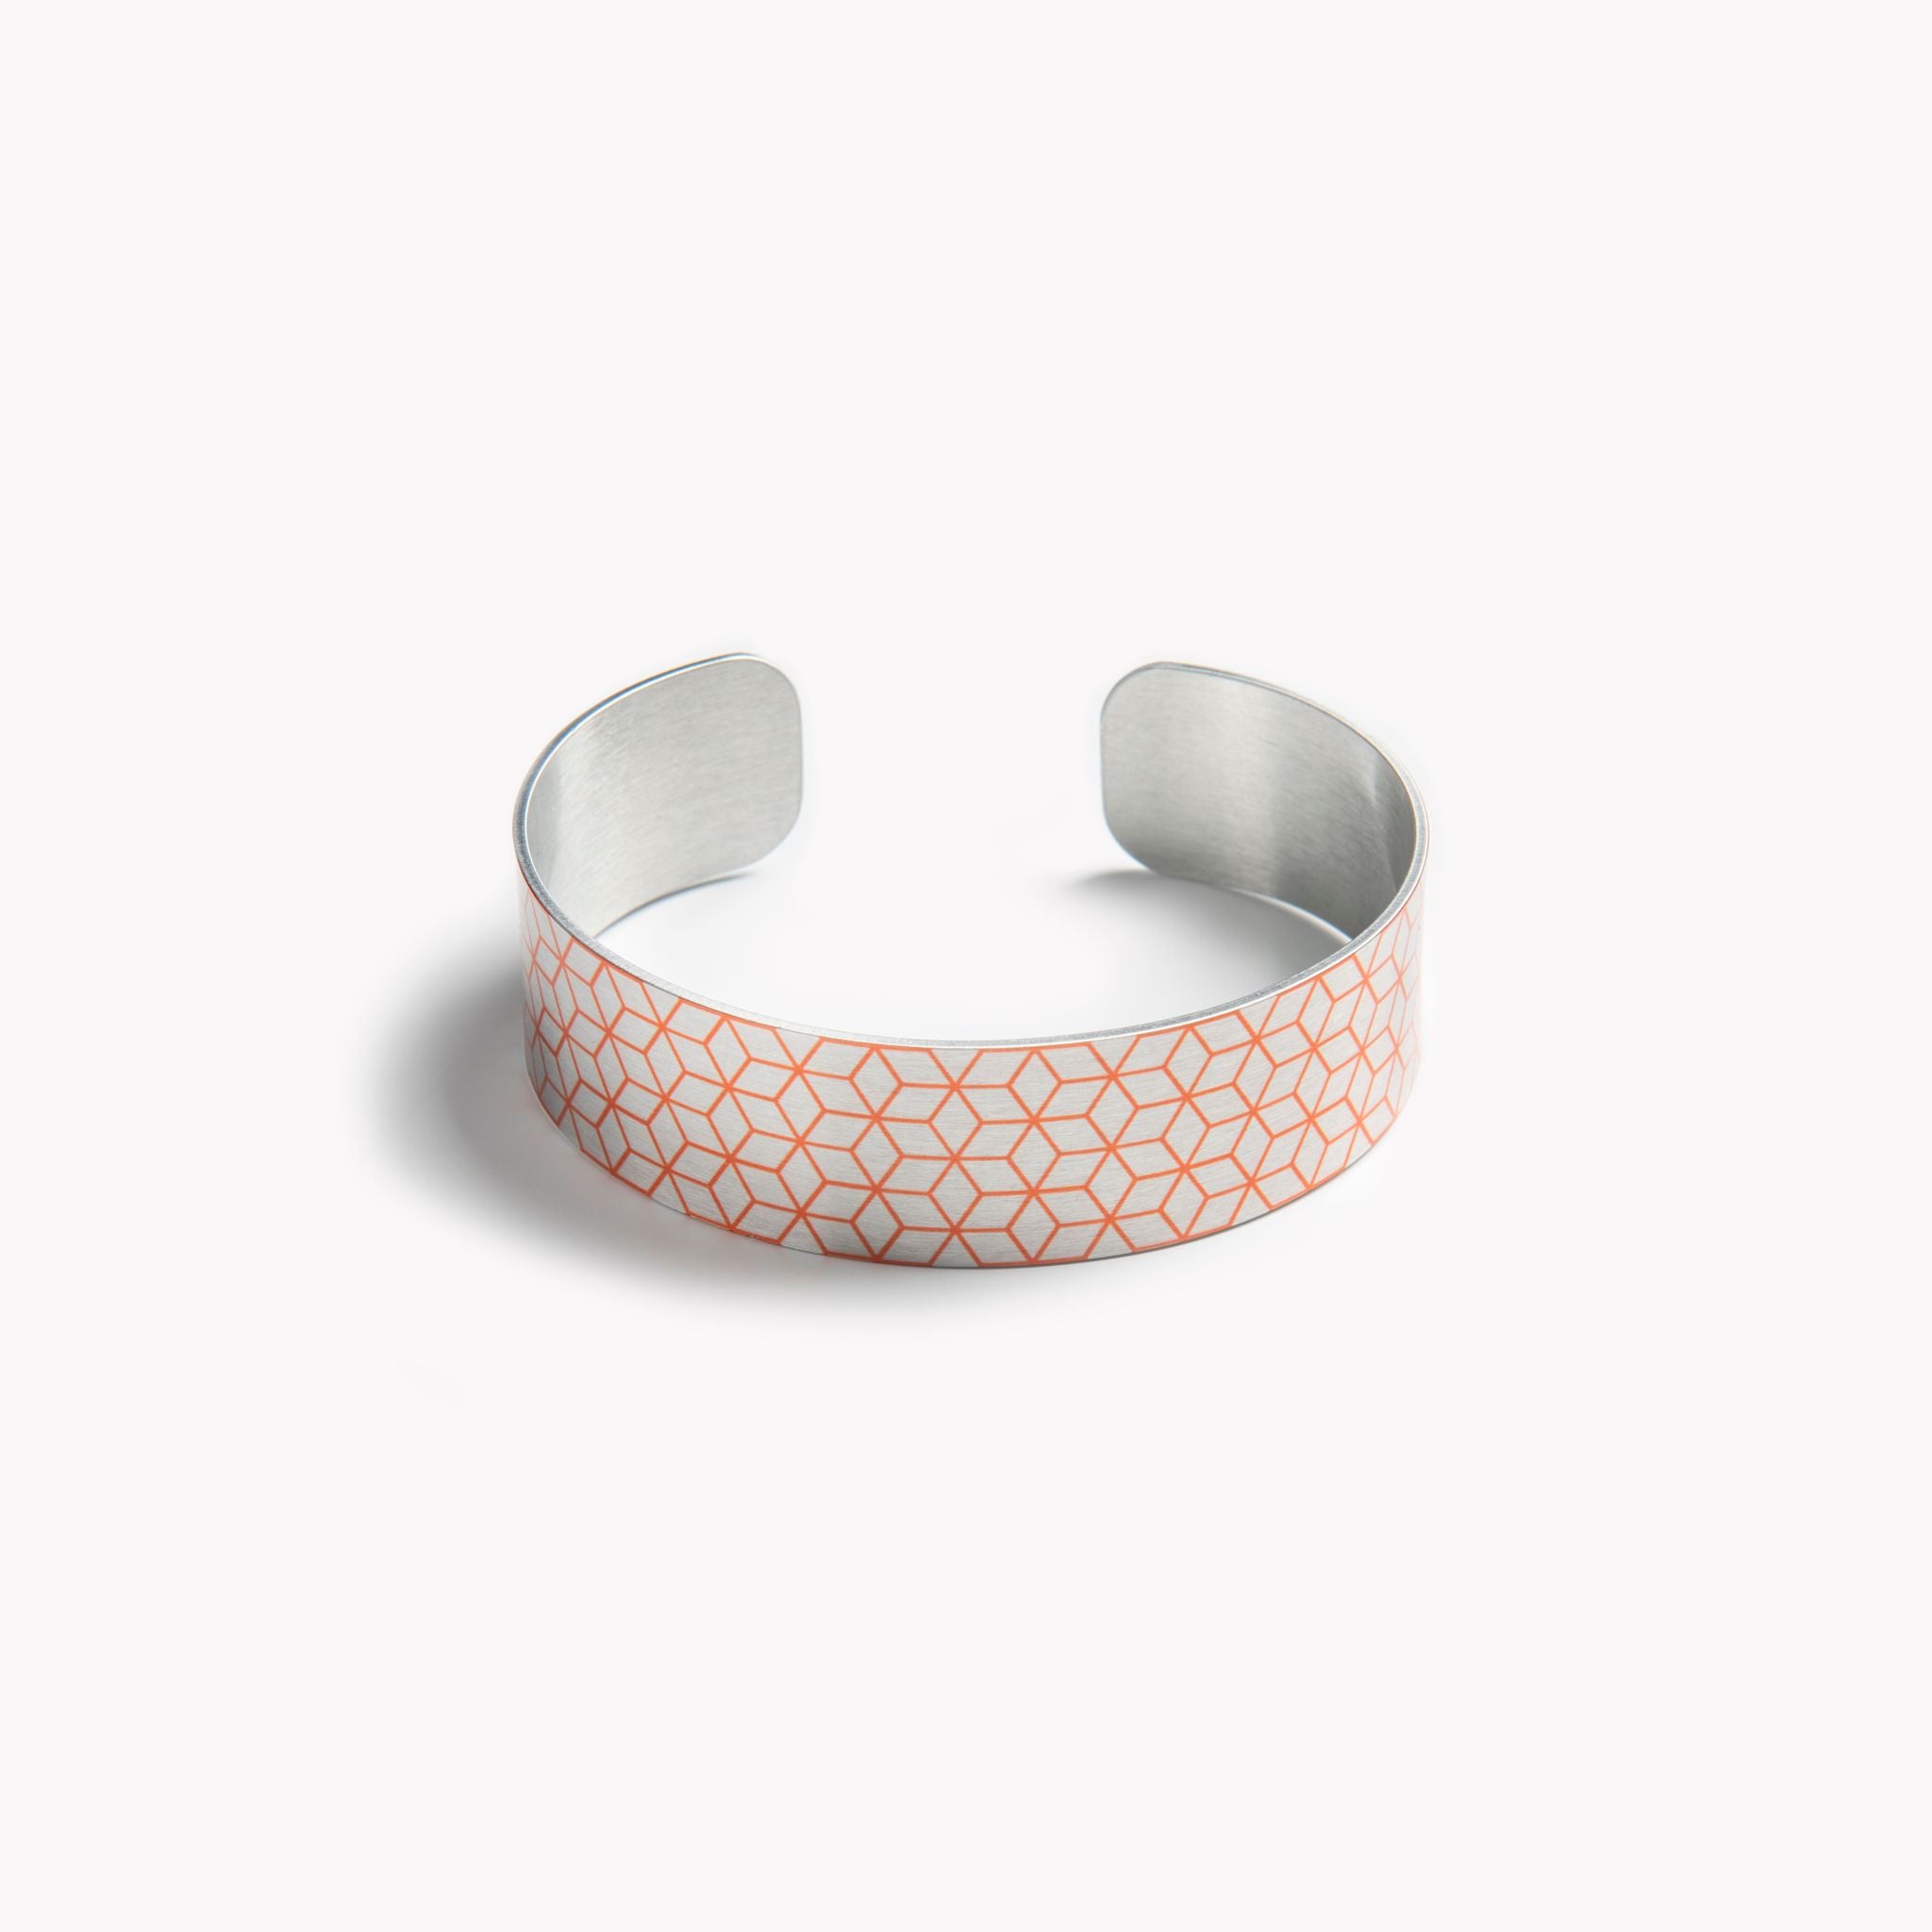 An intricately detailed cuff bracelet with an orange geometric pattern.